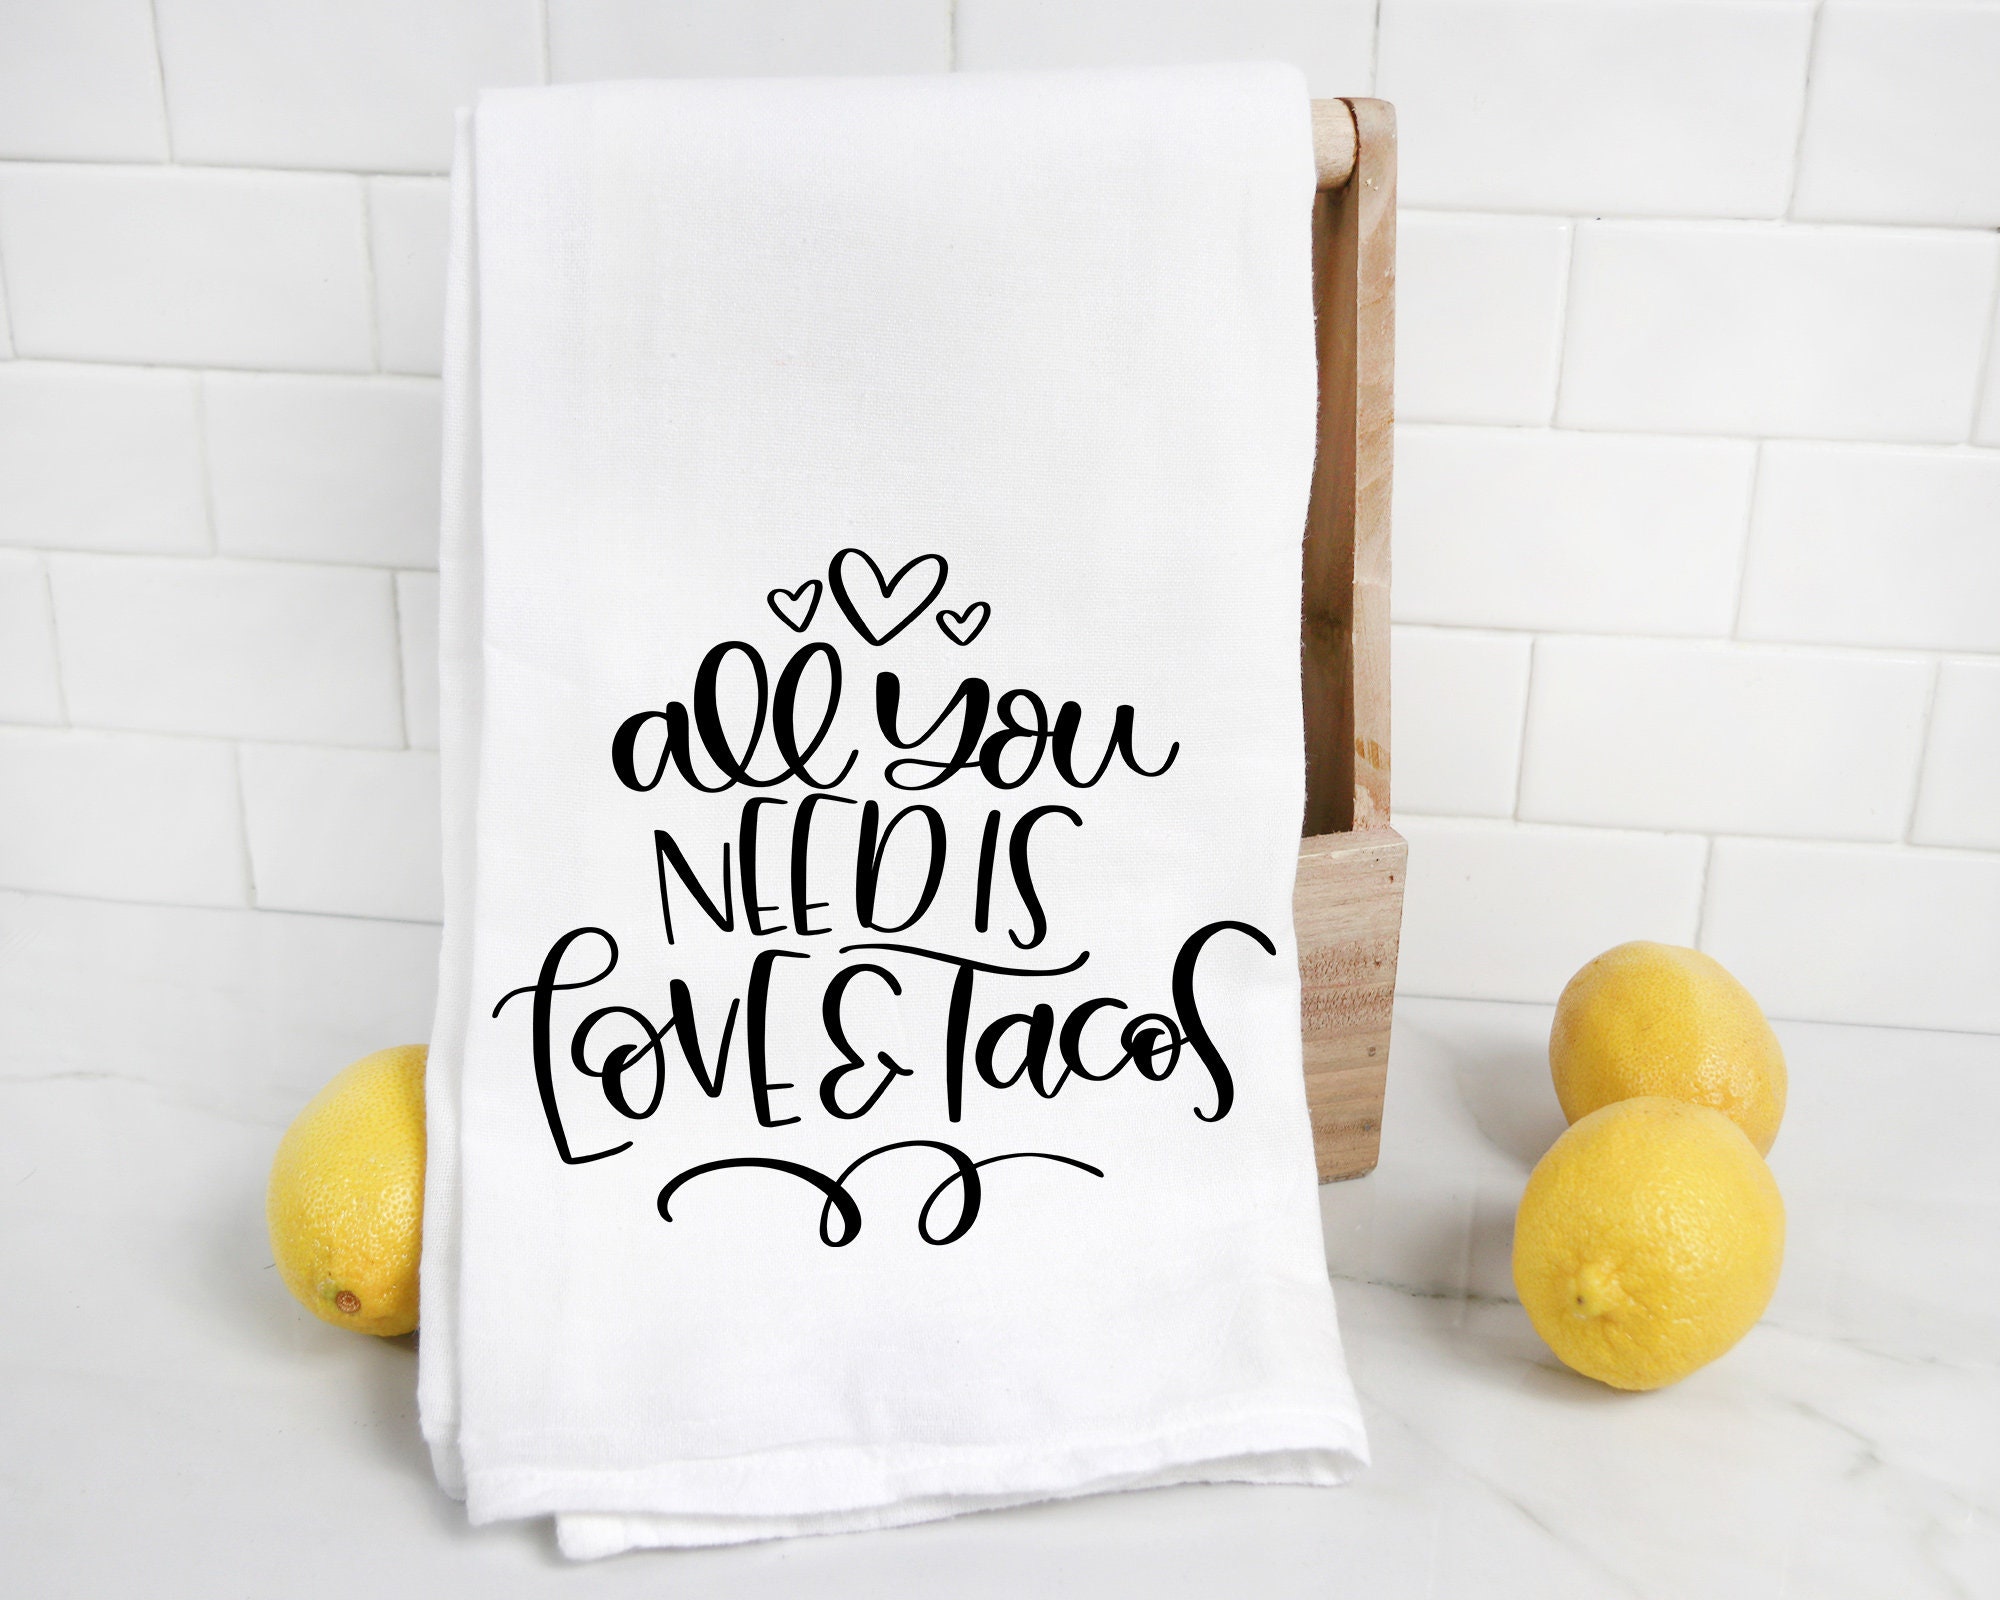 Taco themed kitchen towels